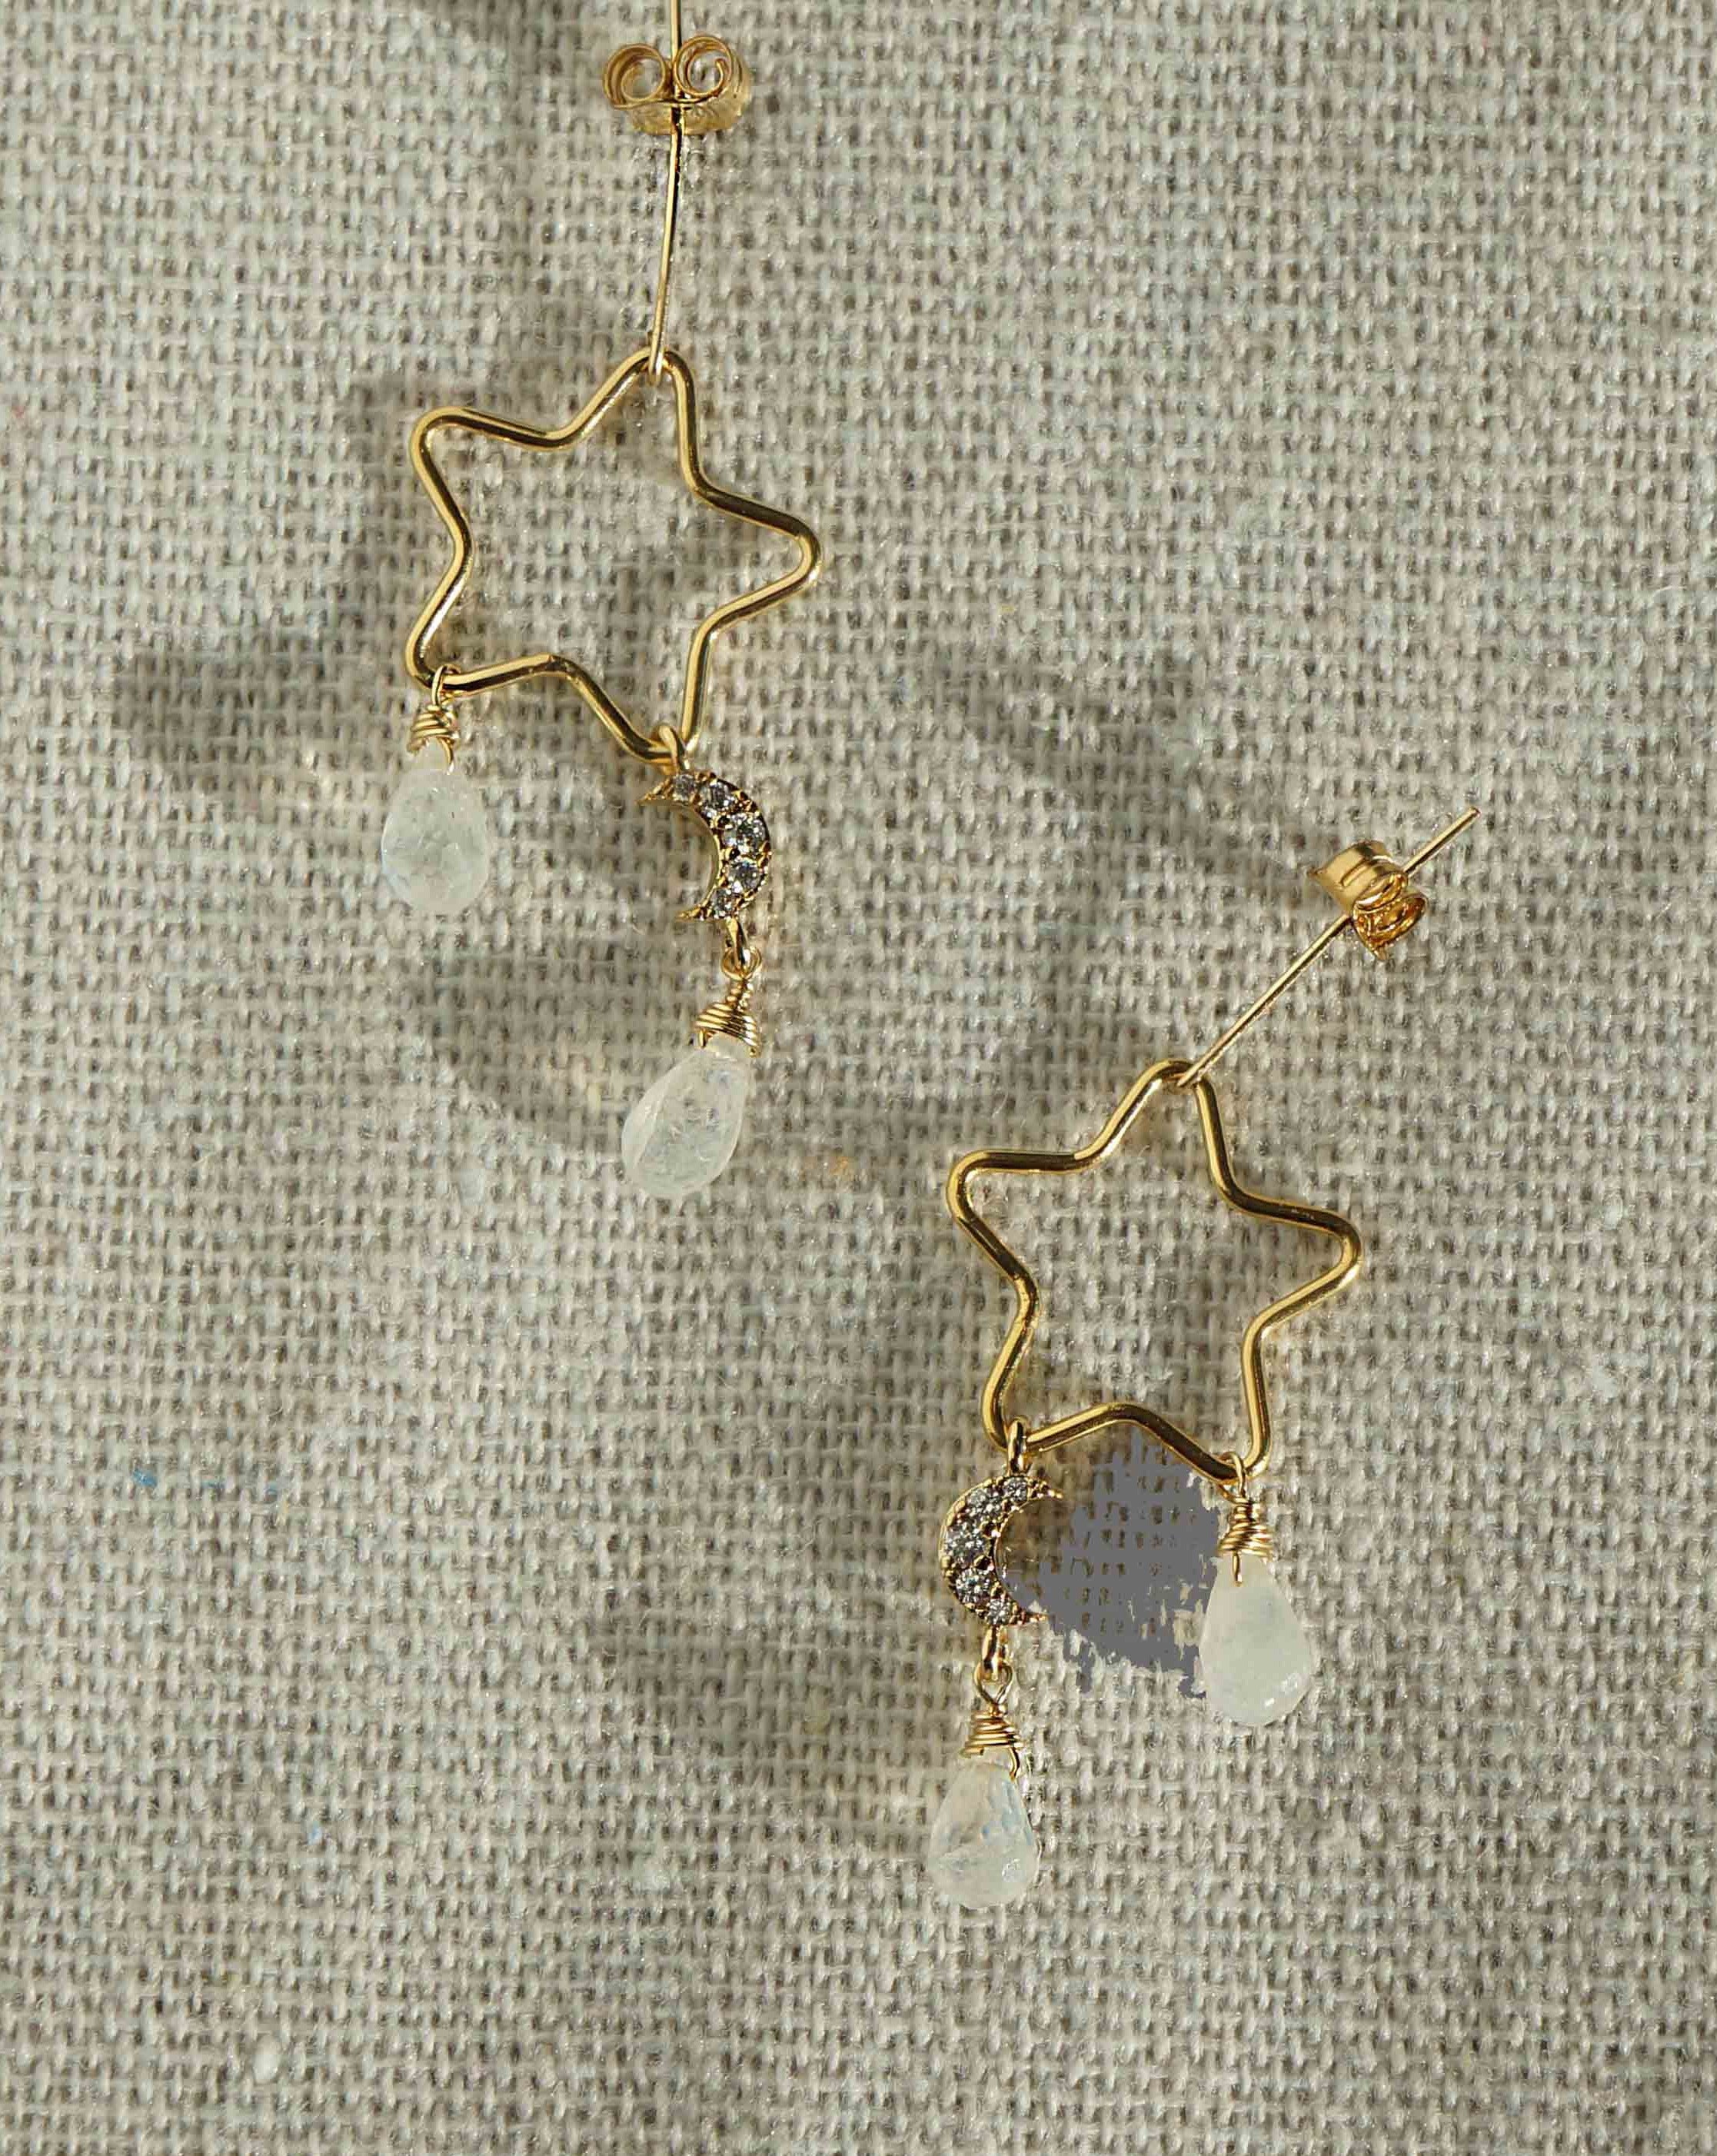 Lyra Earrings by KOZAKH. Dangling style stud earrings crafted in 14K Gold Filled, featuring a star wire charm, faceted Moonstone droplets, and a Cubic Zirconia encrusted moon charm.